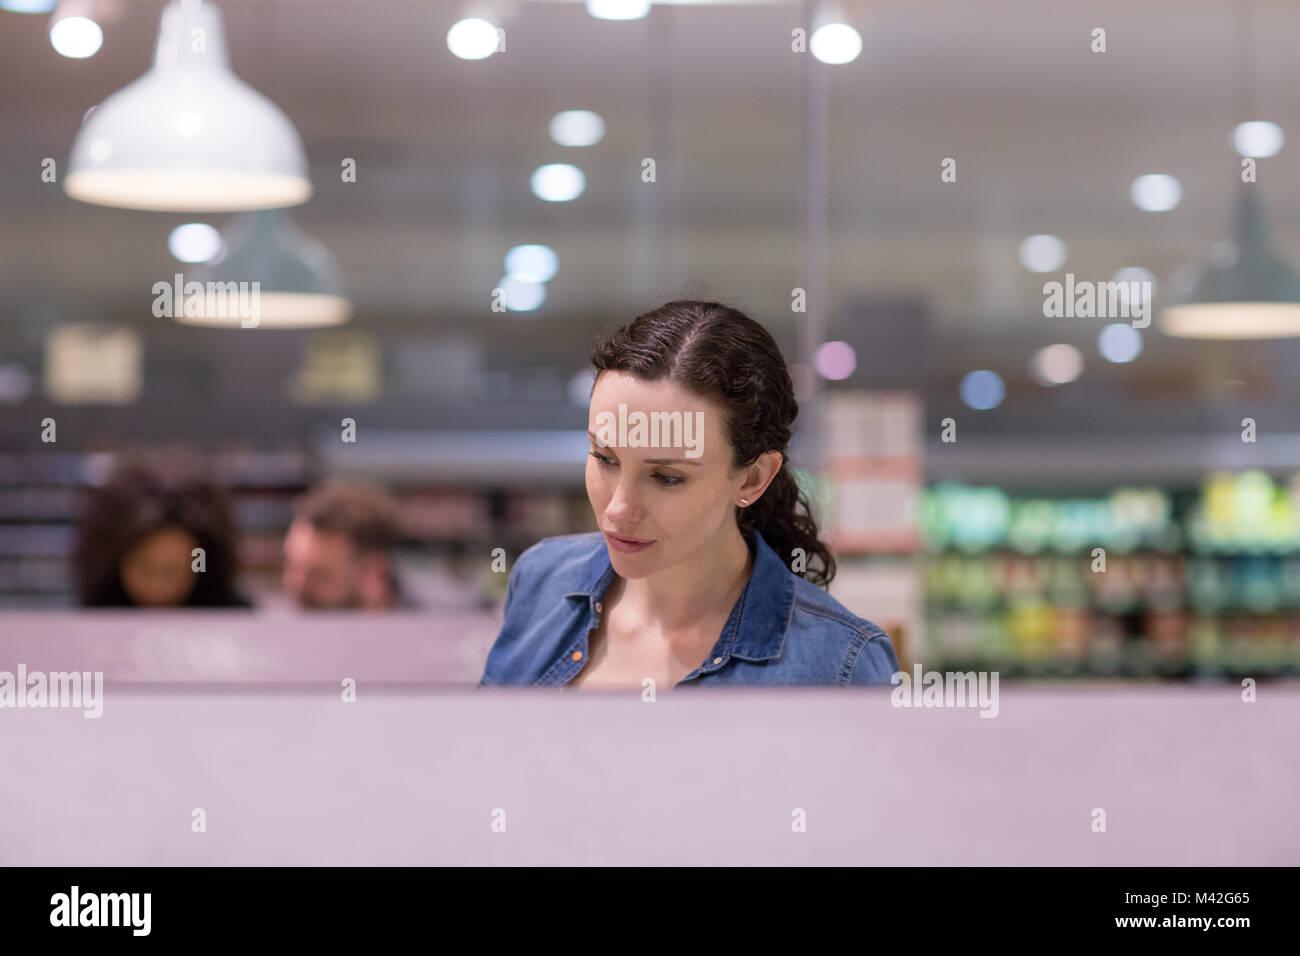 Woman looking at ready meal in grocery store Stock Photo